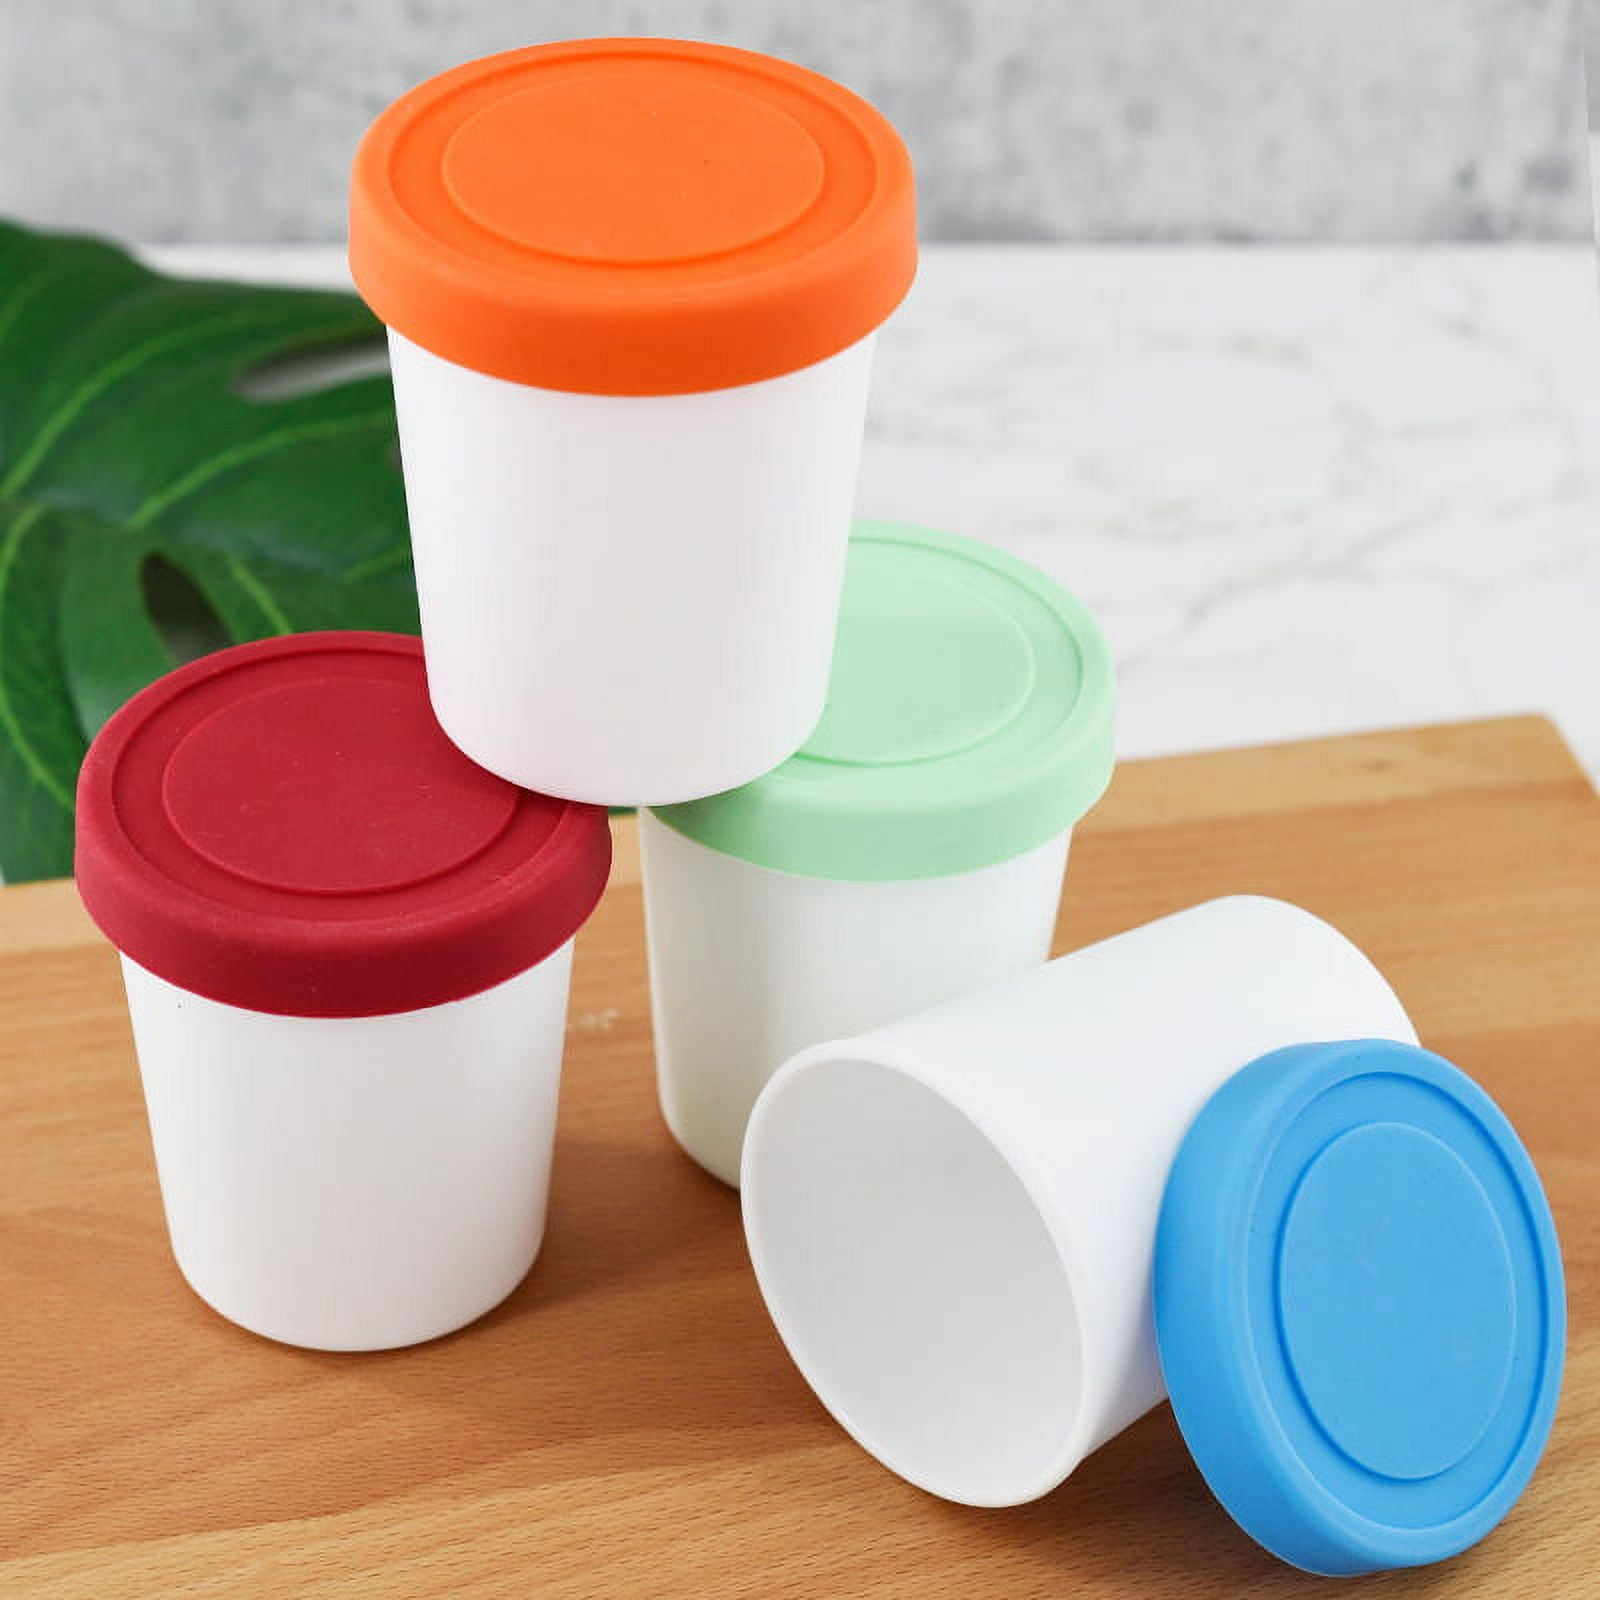 Walfos Ice Cream Containers - 1.6 Quart Each, Reusable Homemade Ice Cream  Tubs with Silicone Lids, Stackable Freezer Storage Container for Yogurt